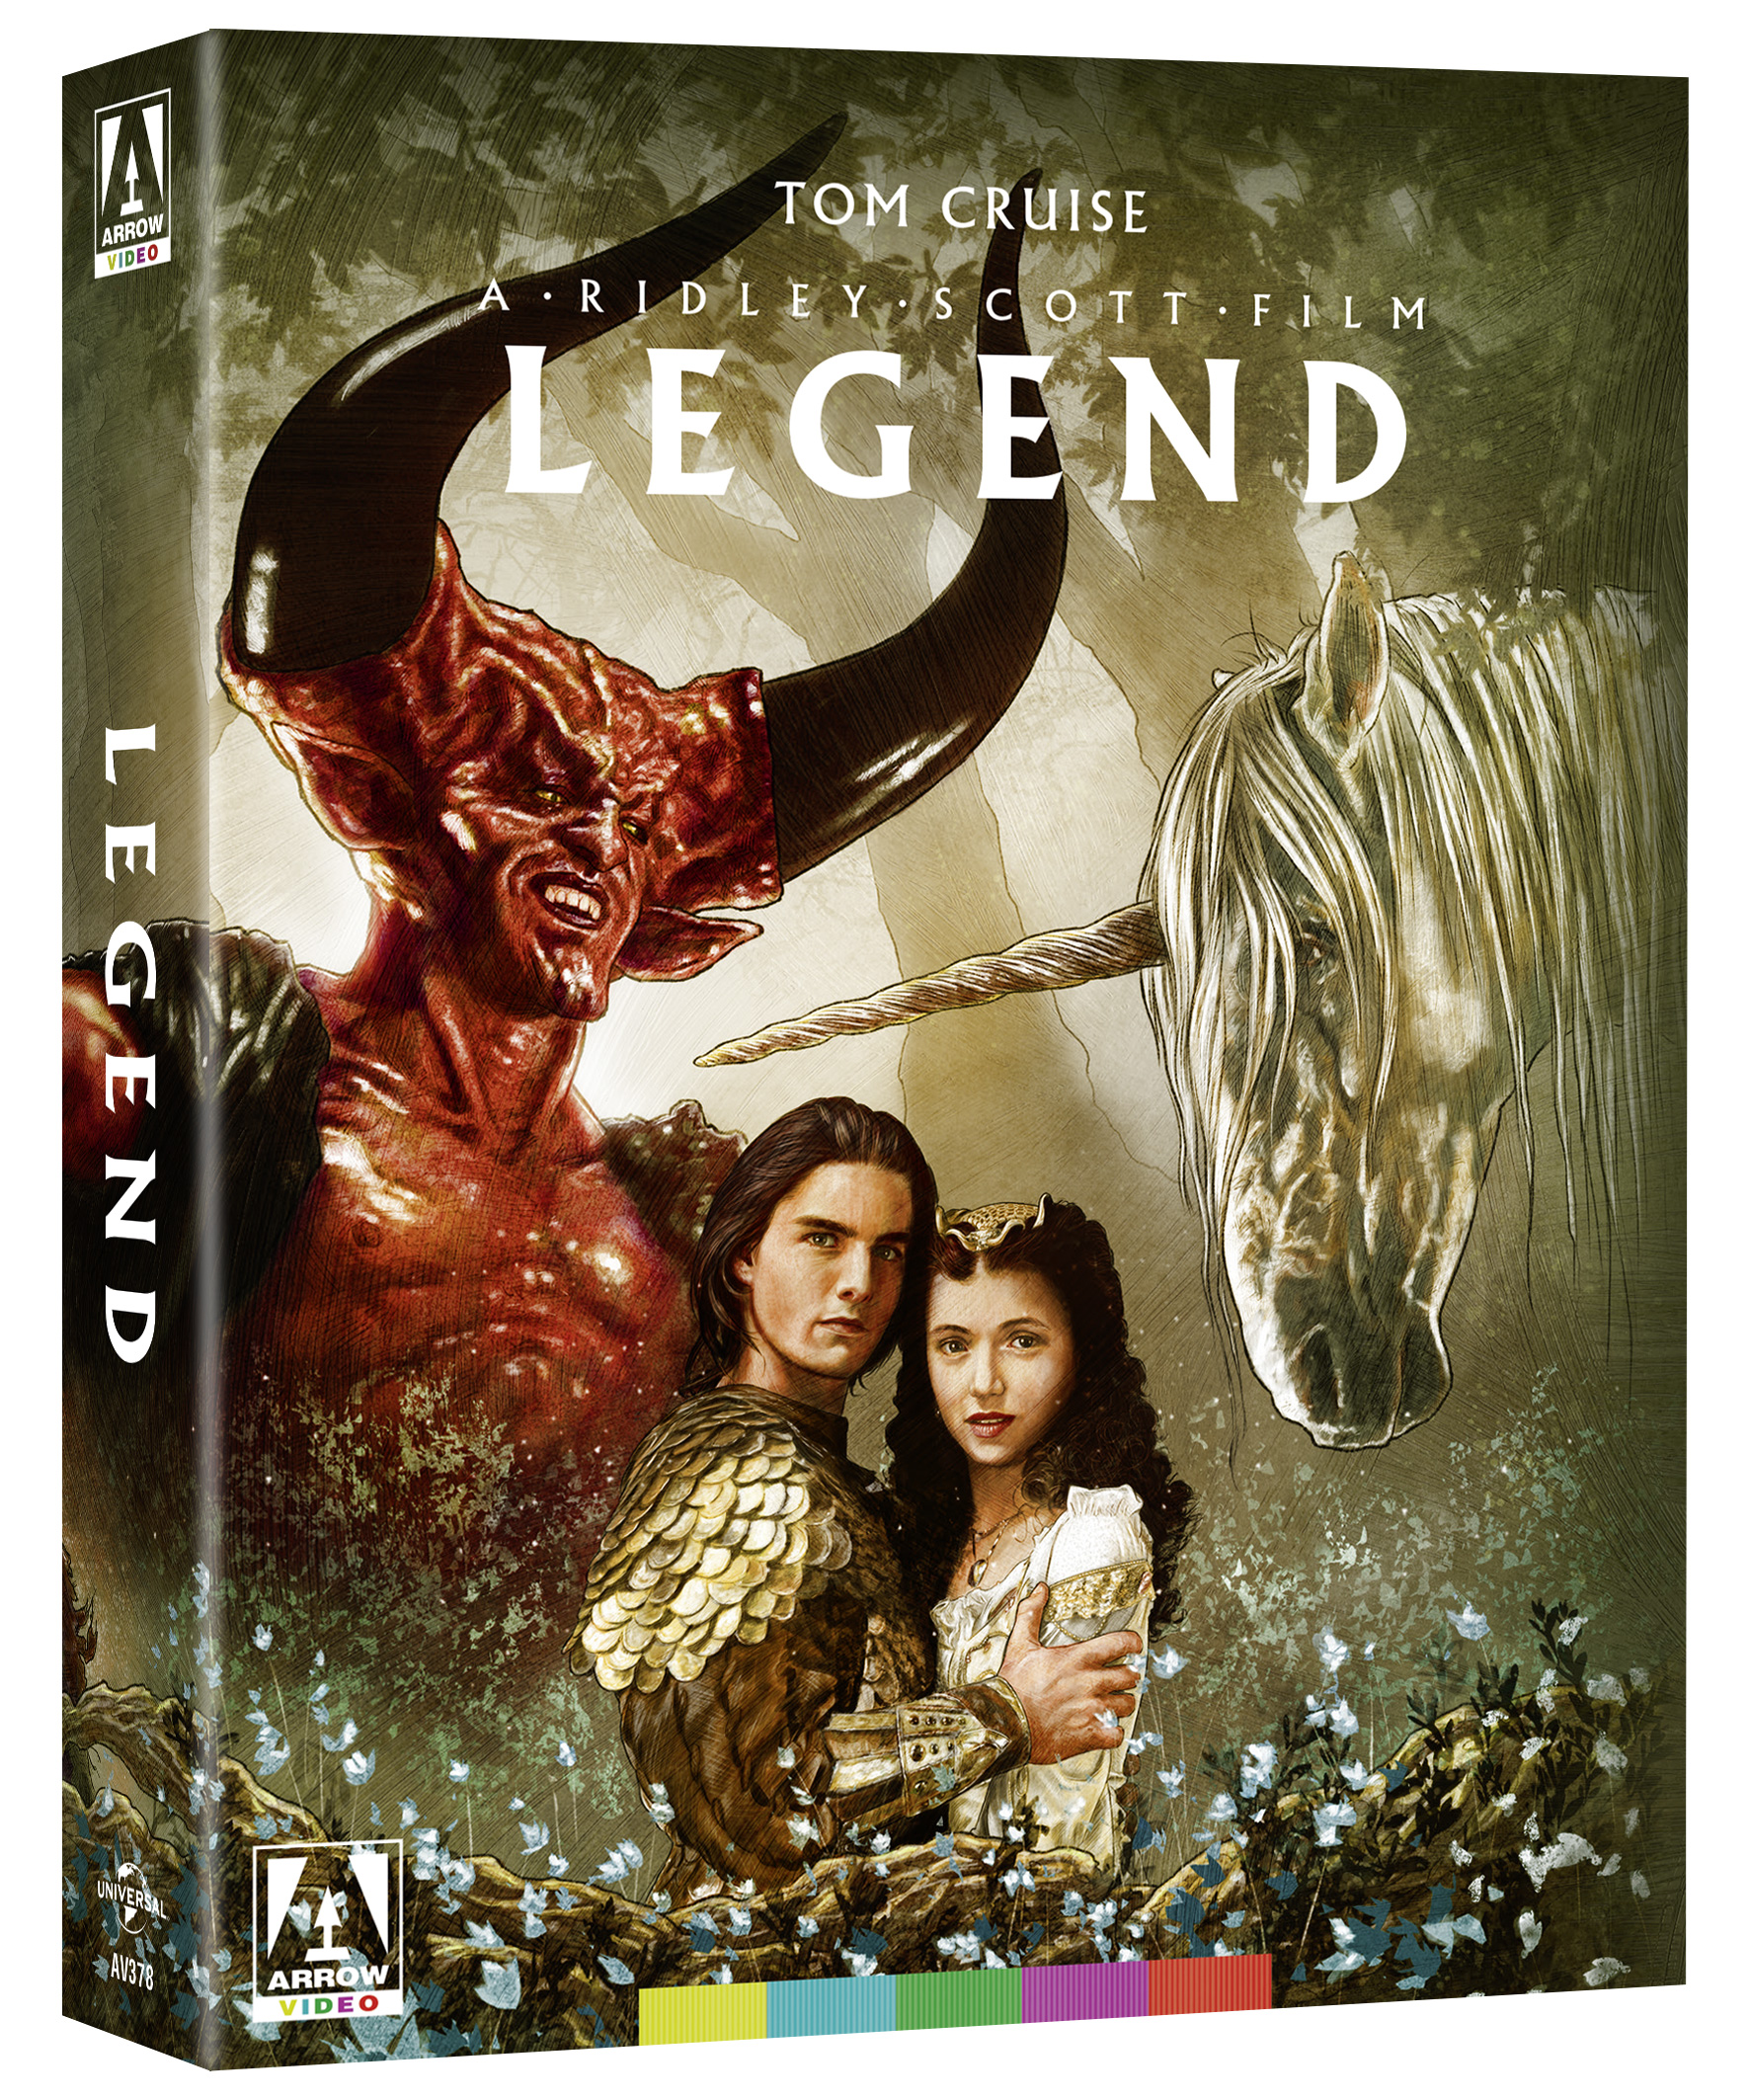 Legend
              Limited Edition Blu-ray from Arrow Video